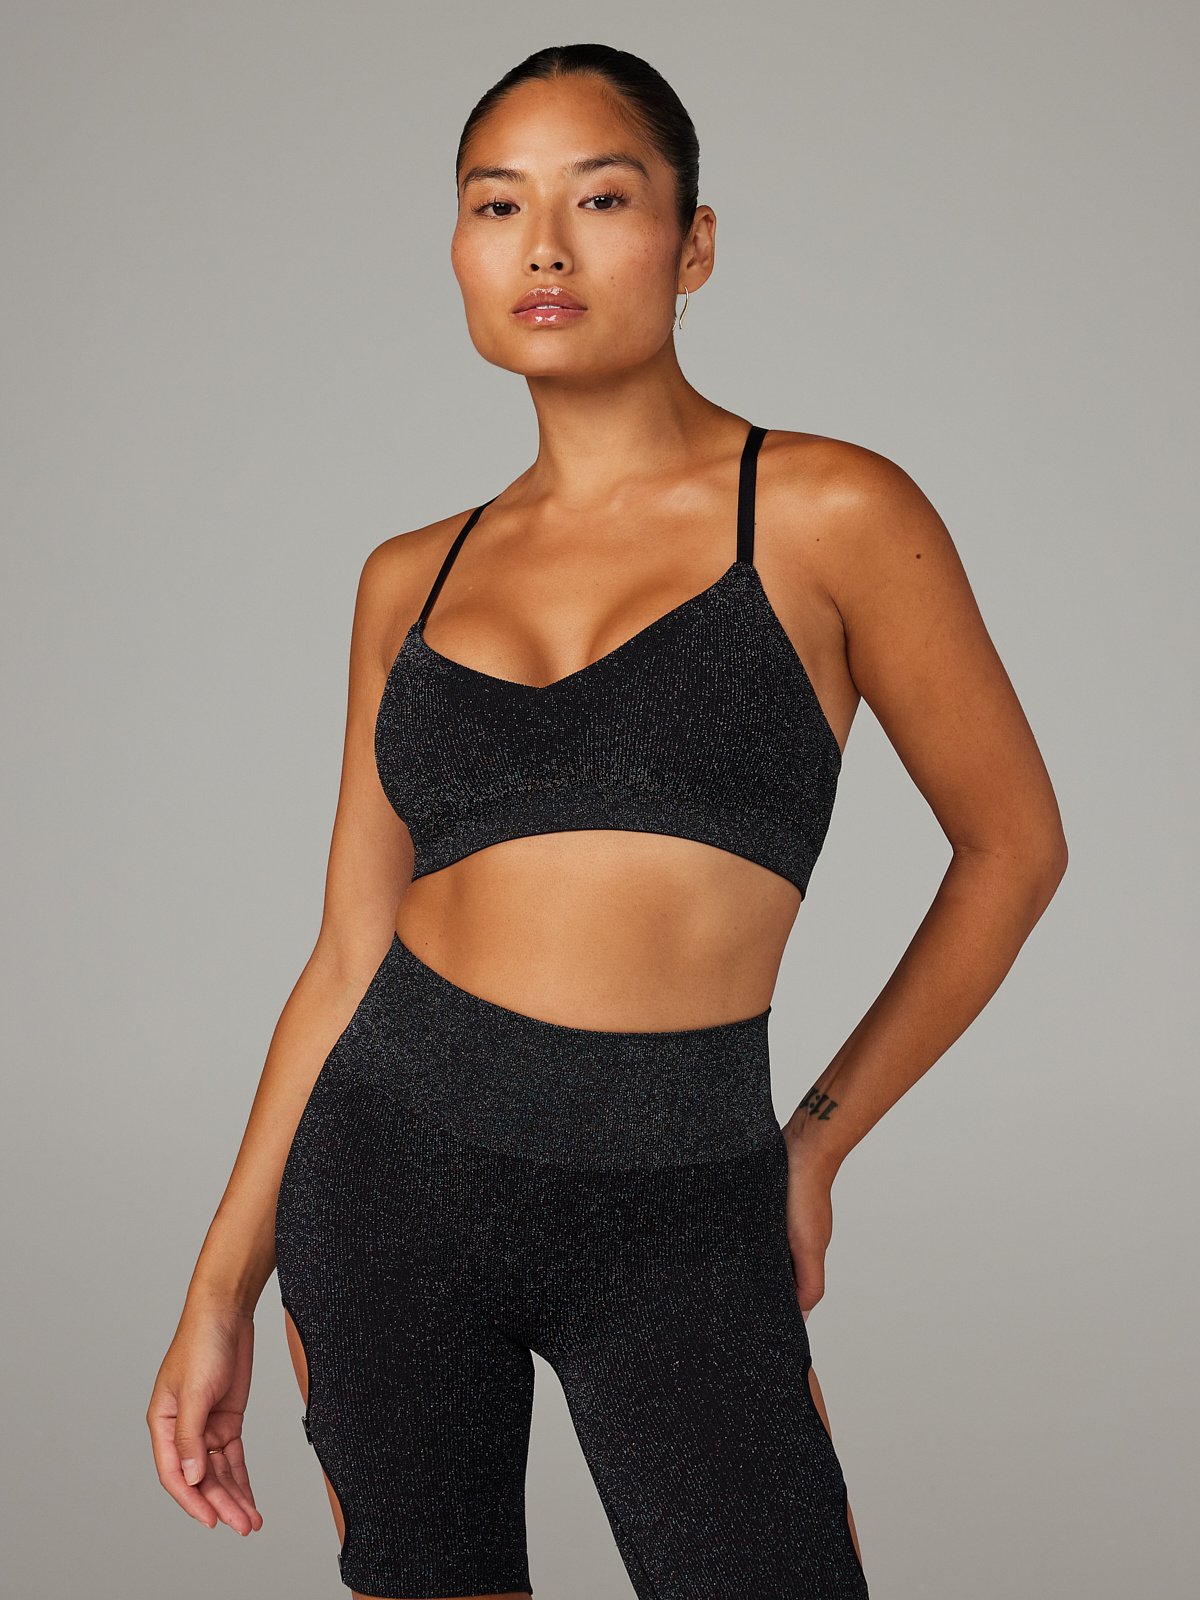 https://cdn.savagex.com/media/images/products/TP2356146-0687/BAWDY-DOUBLE-KNIT-BRALETTE-TP2356146-0687-1-1200x1600.jpg